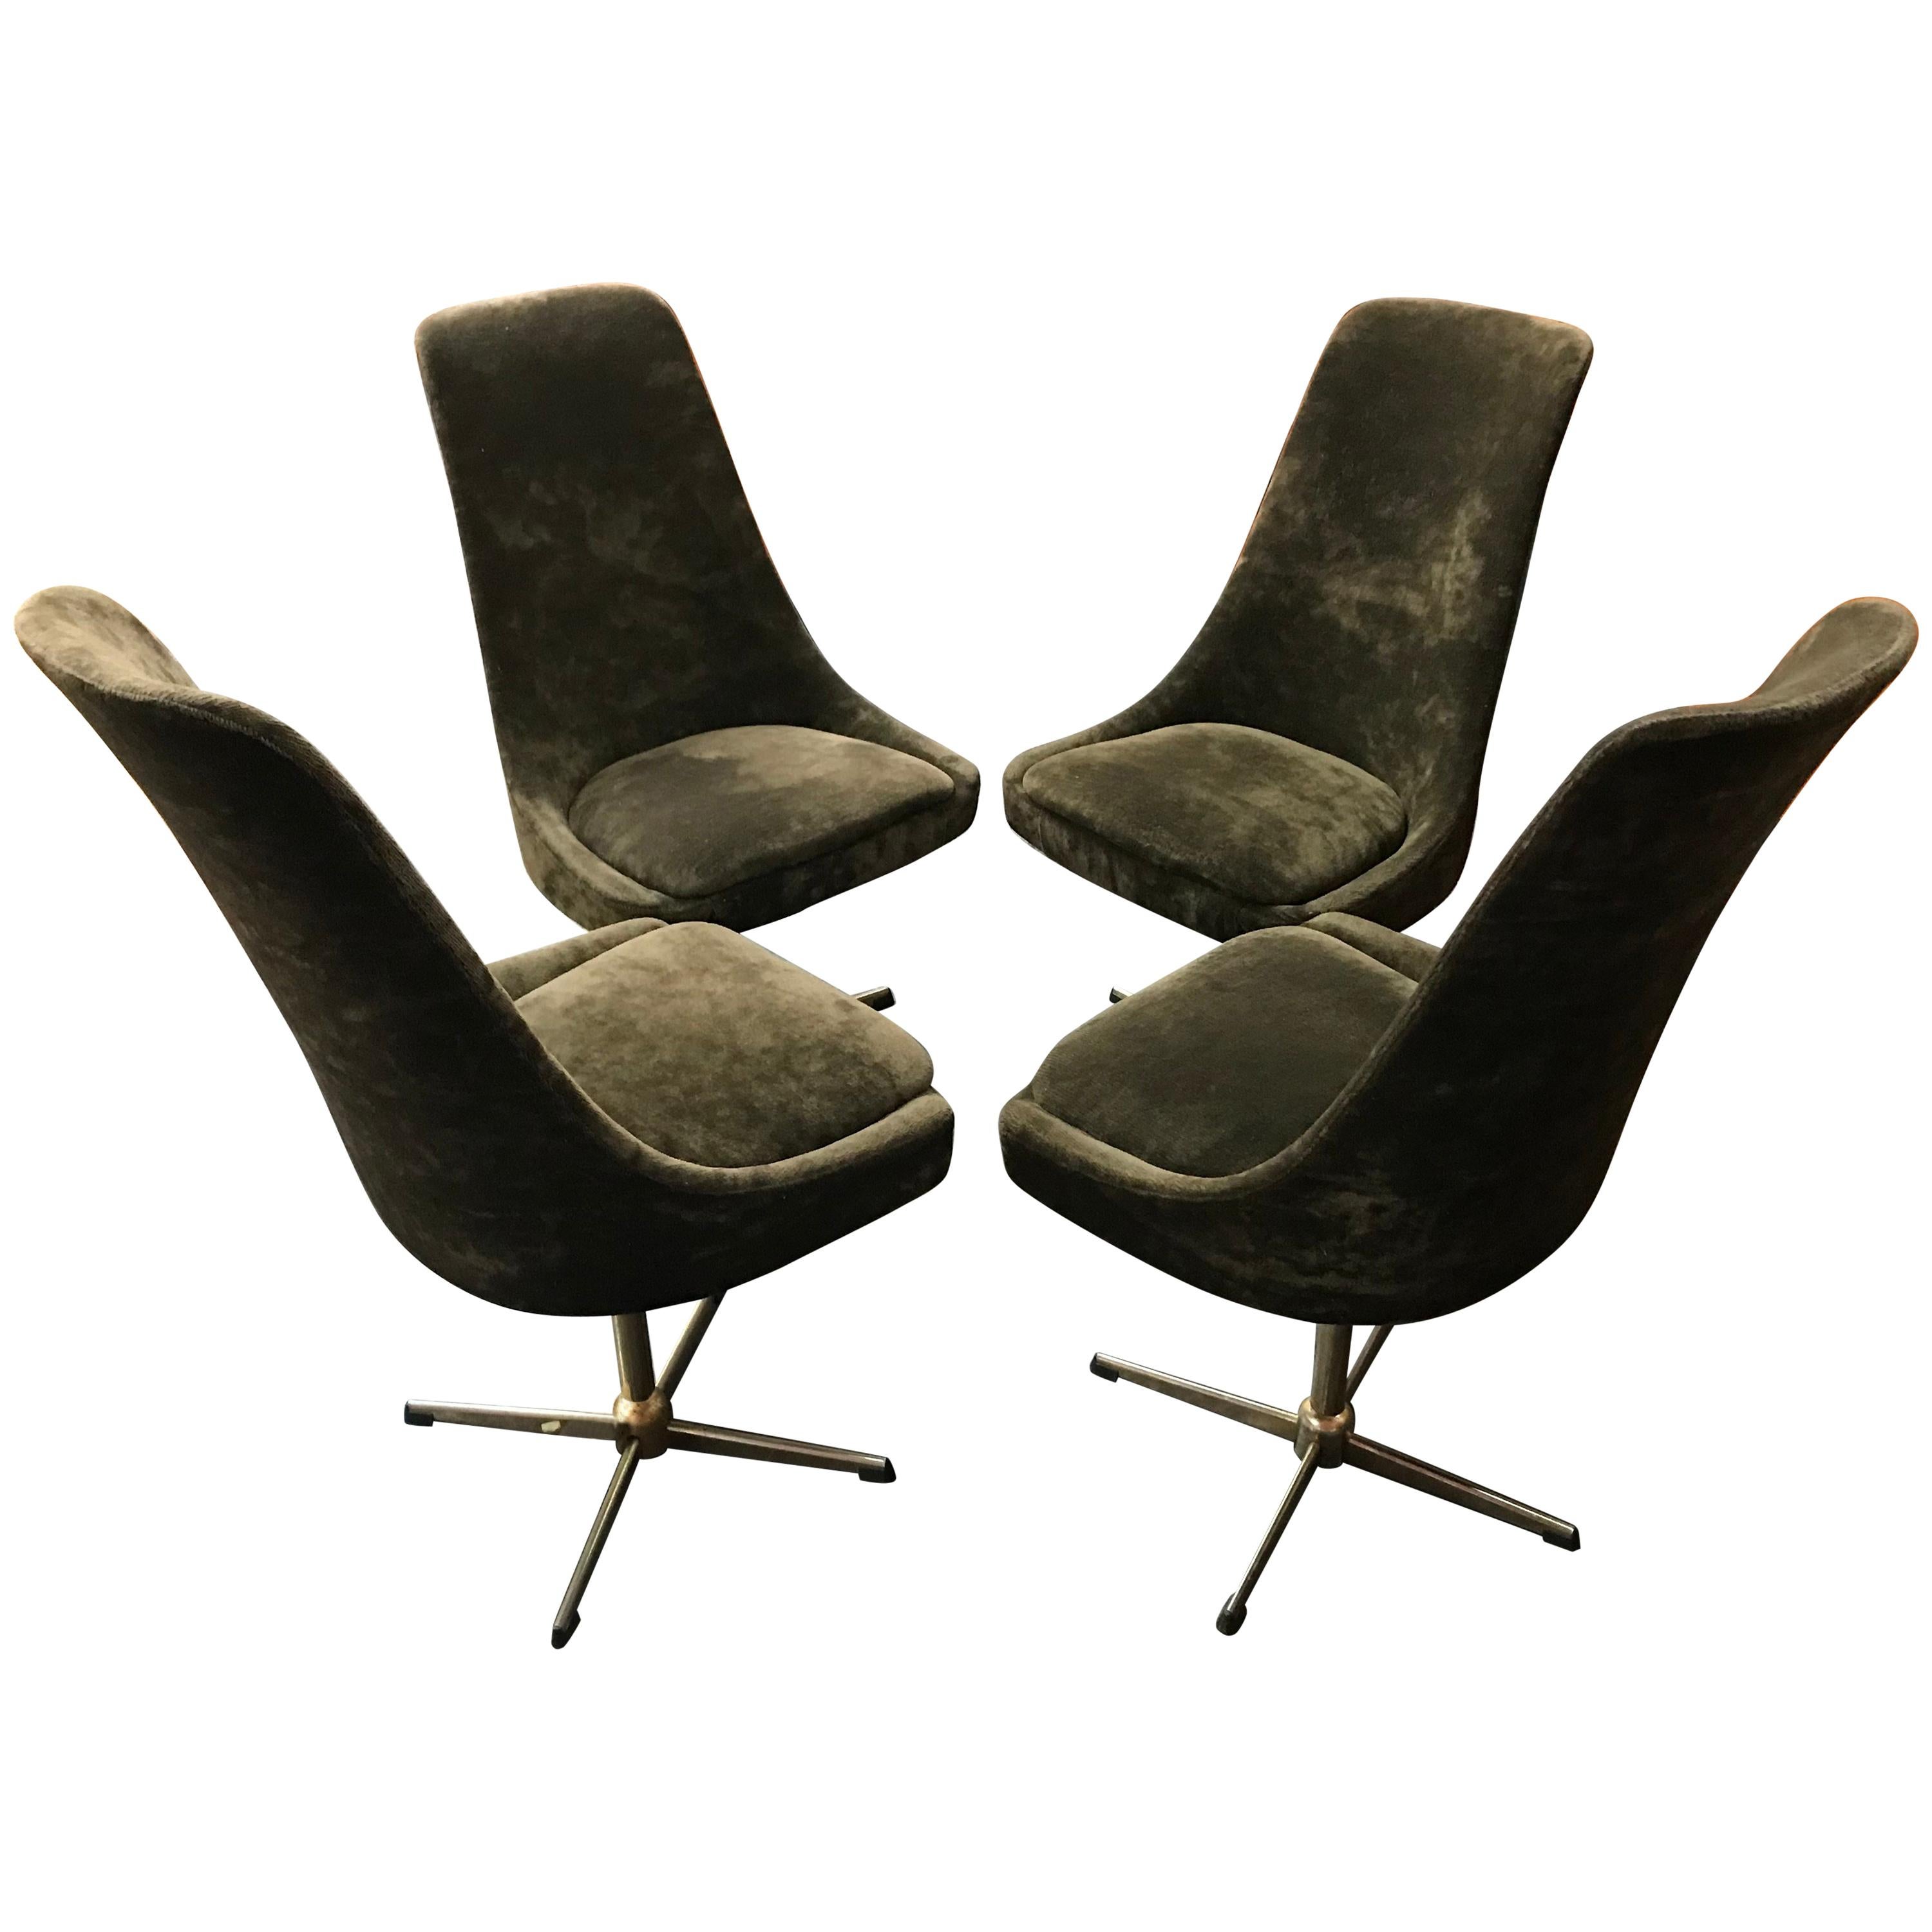 Four Brown Velour Midcentury Swivel Chairs